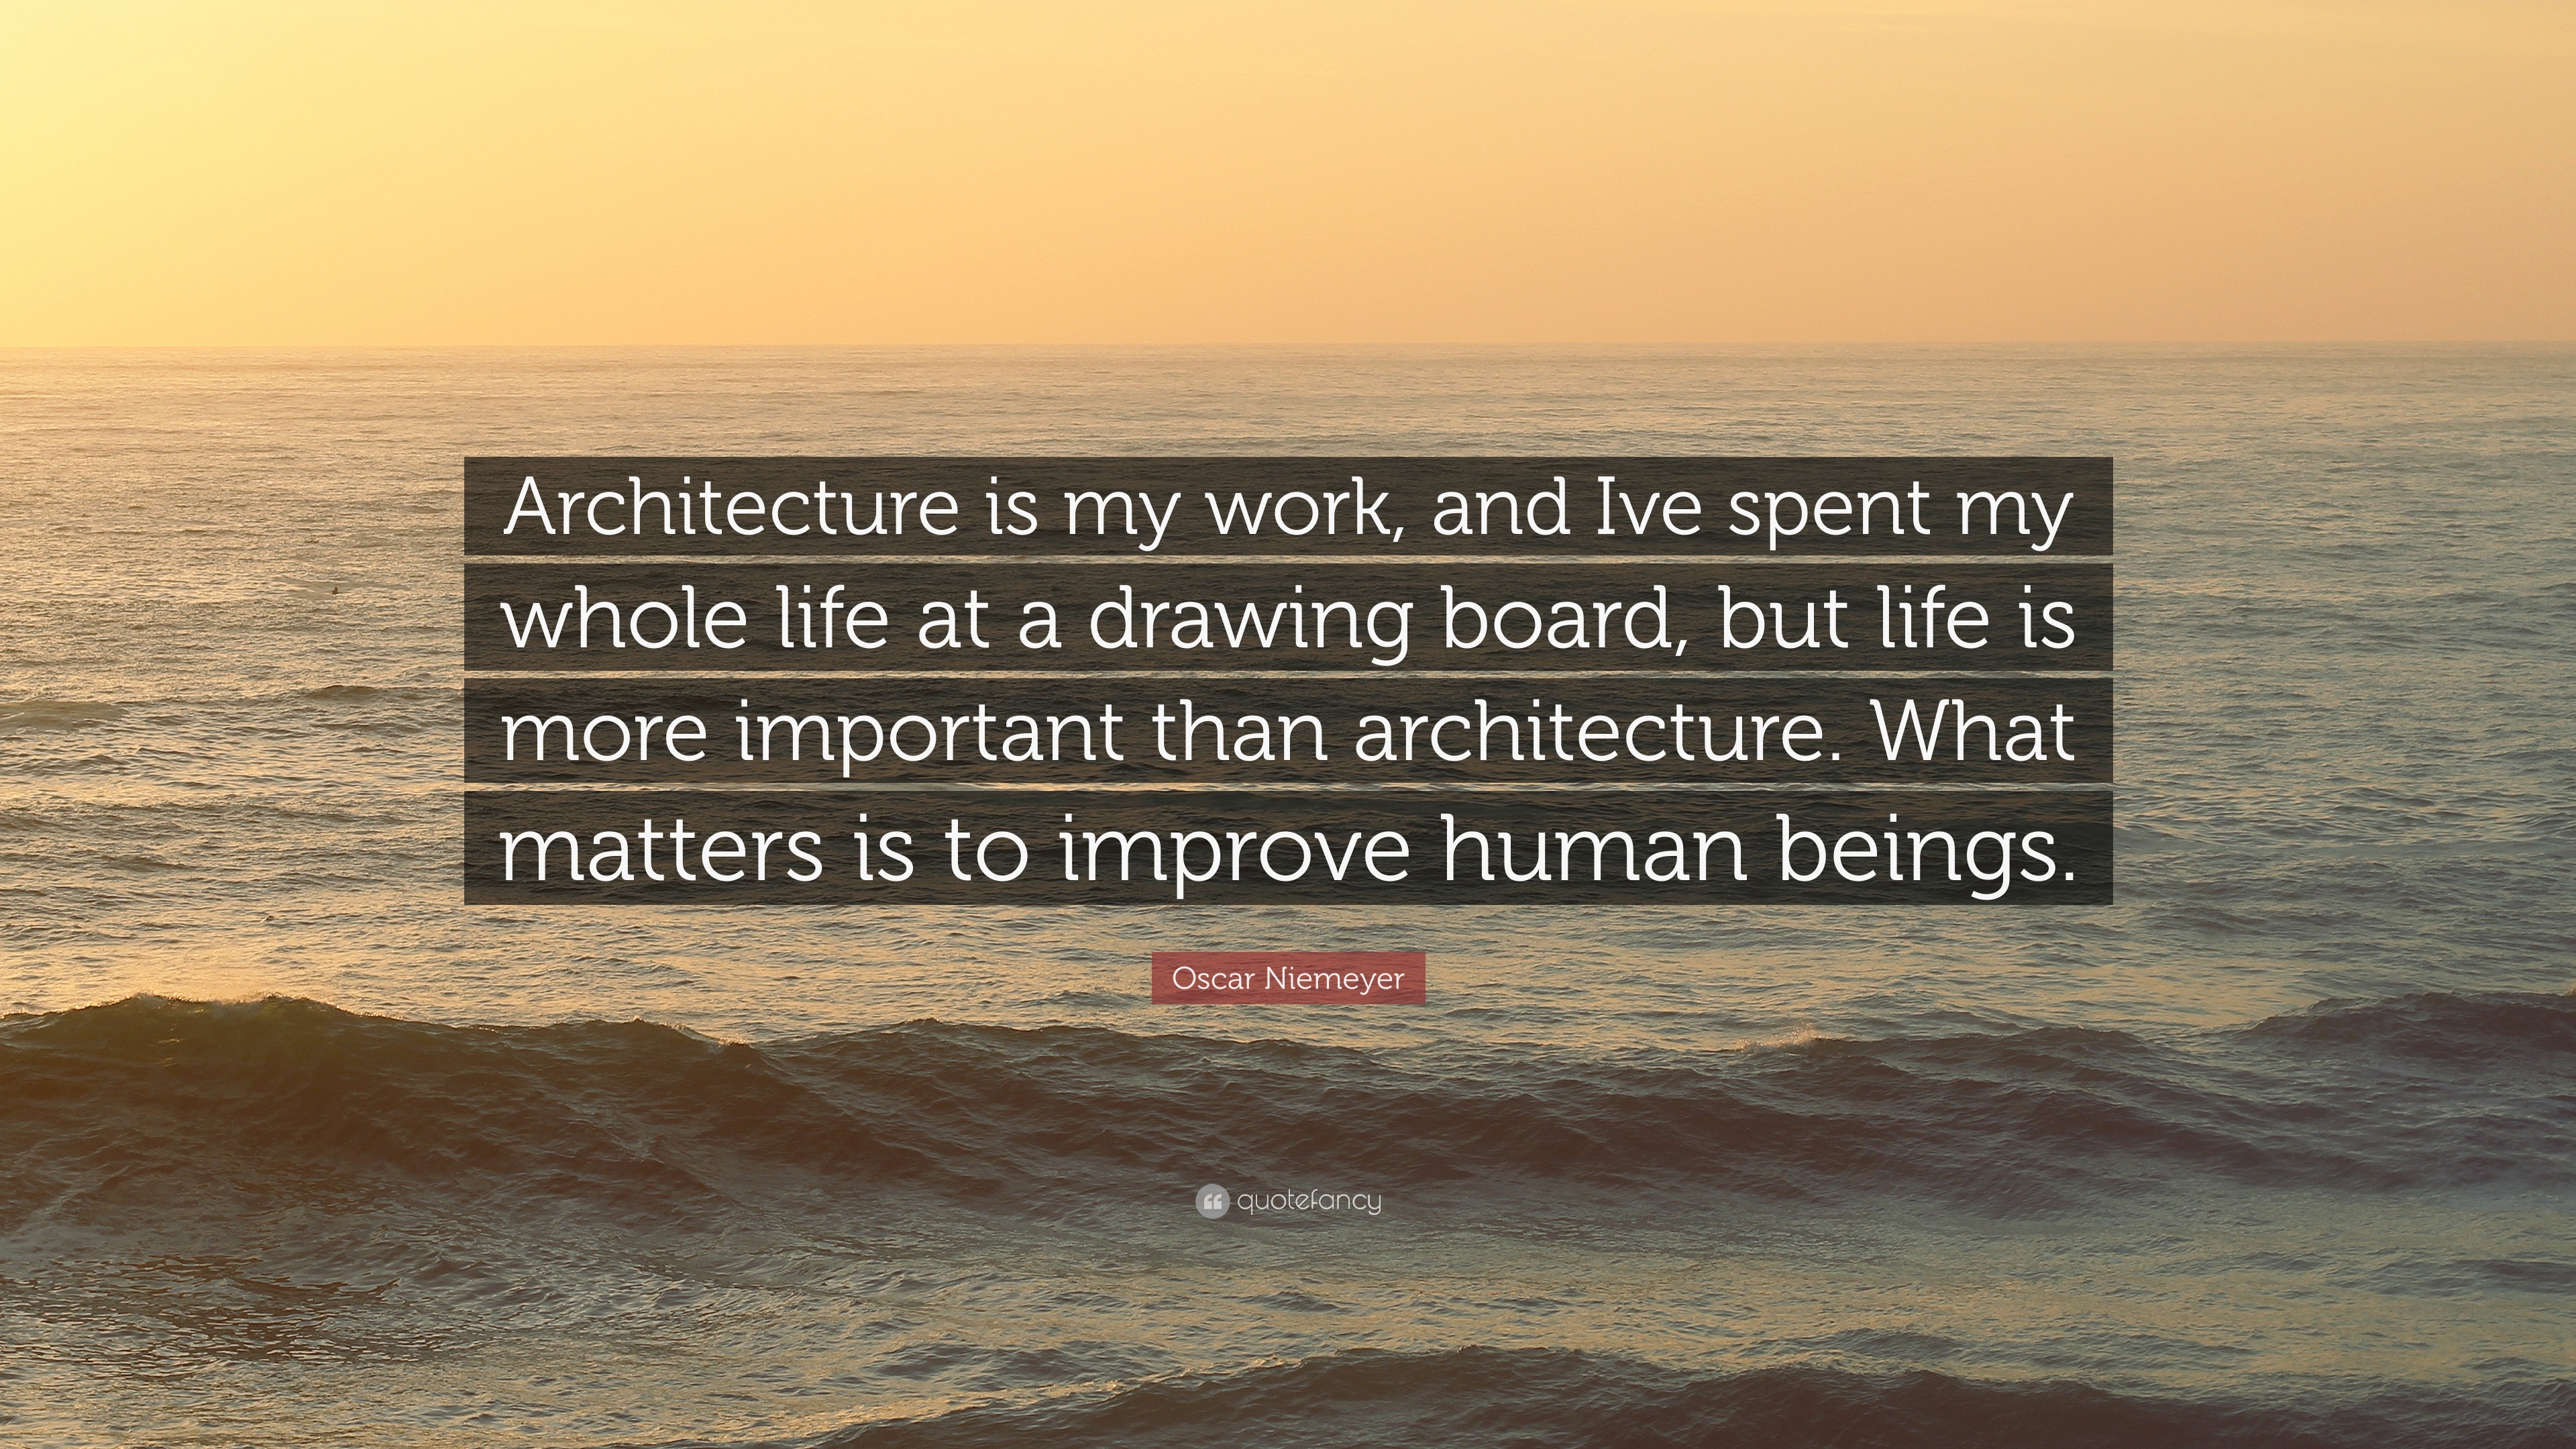 Oscar Niemeyer Quote: “Architecture is my work, and Ive spent my whole ...